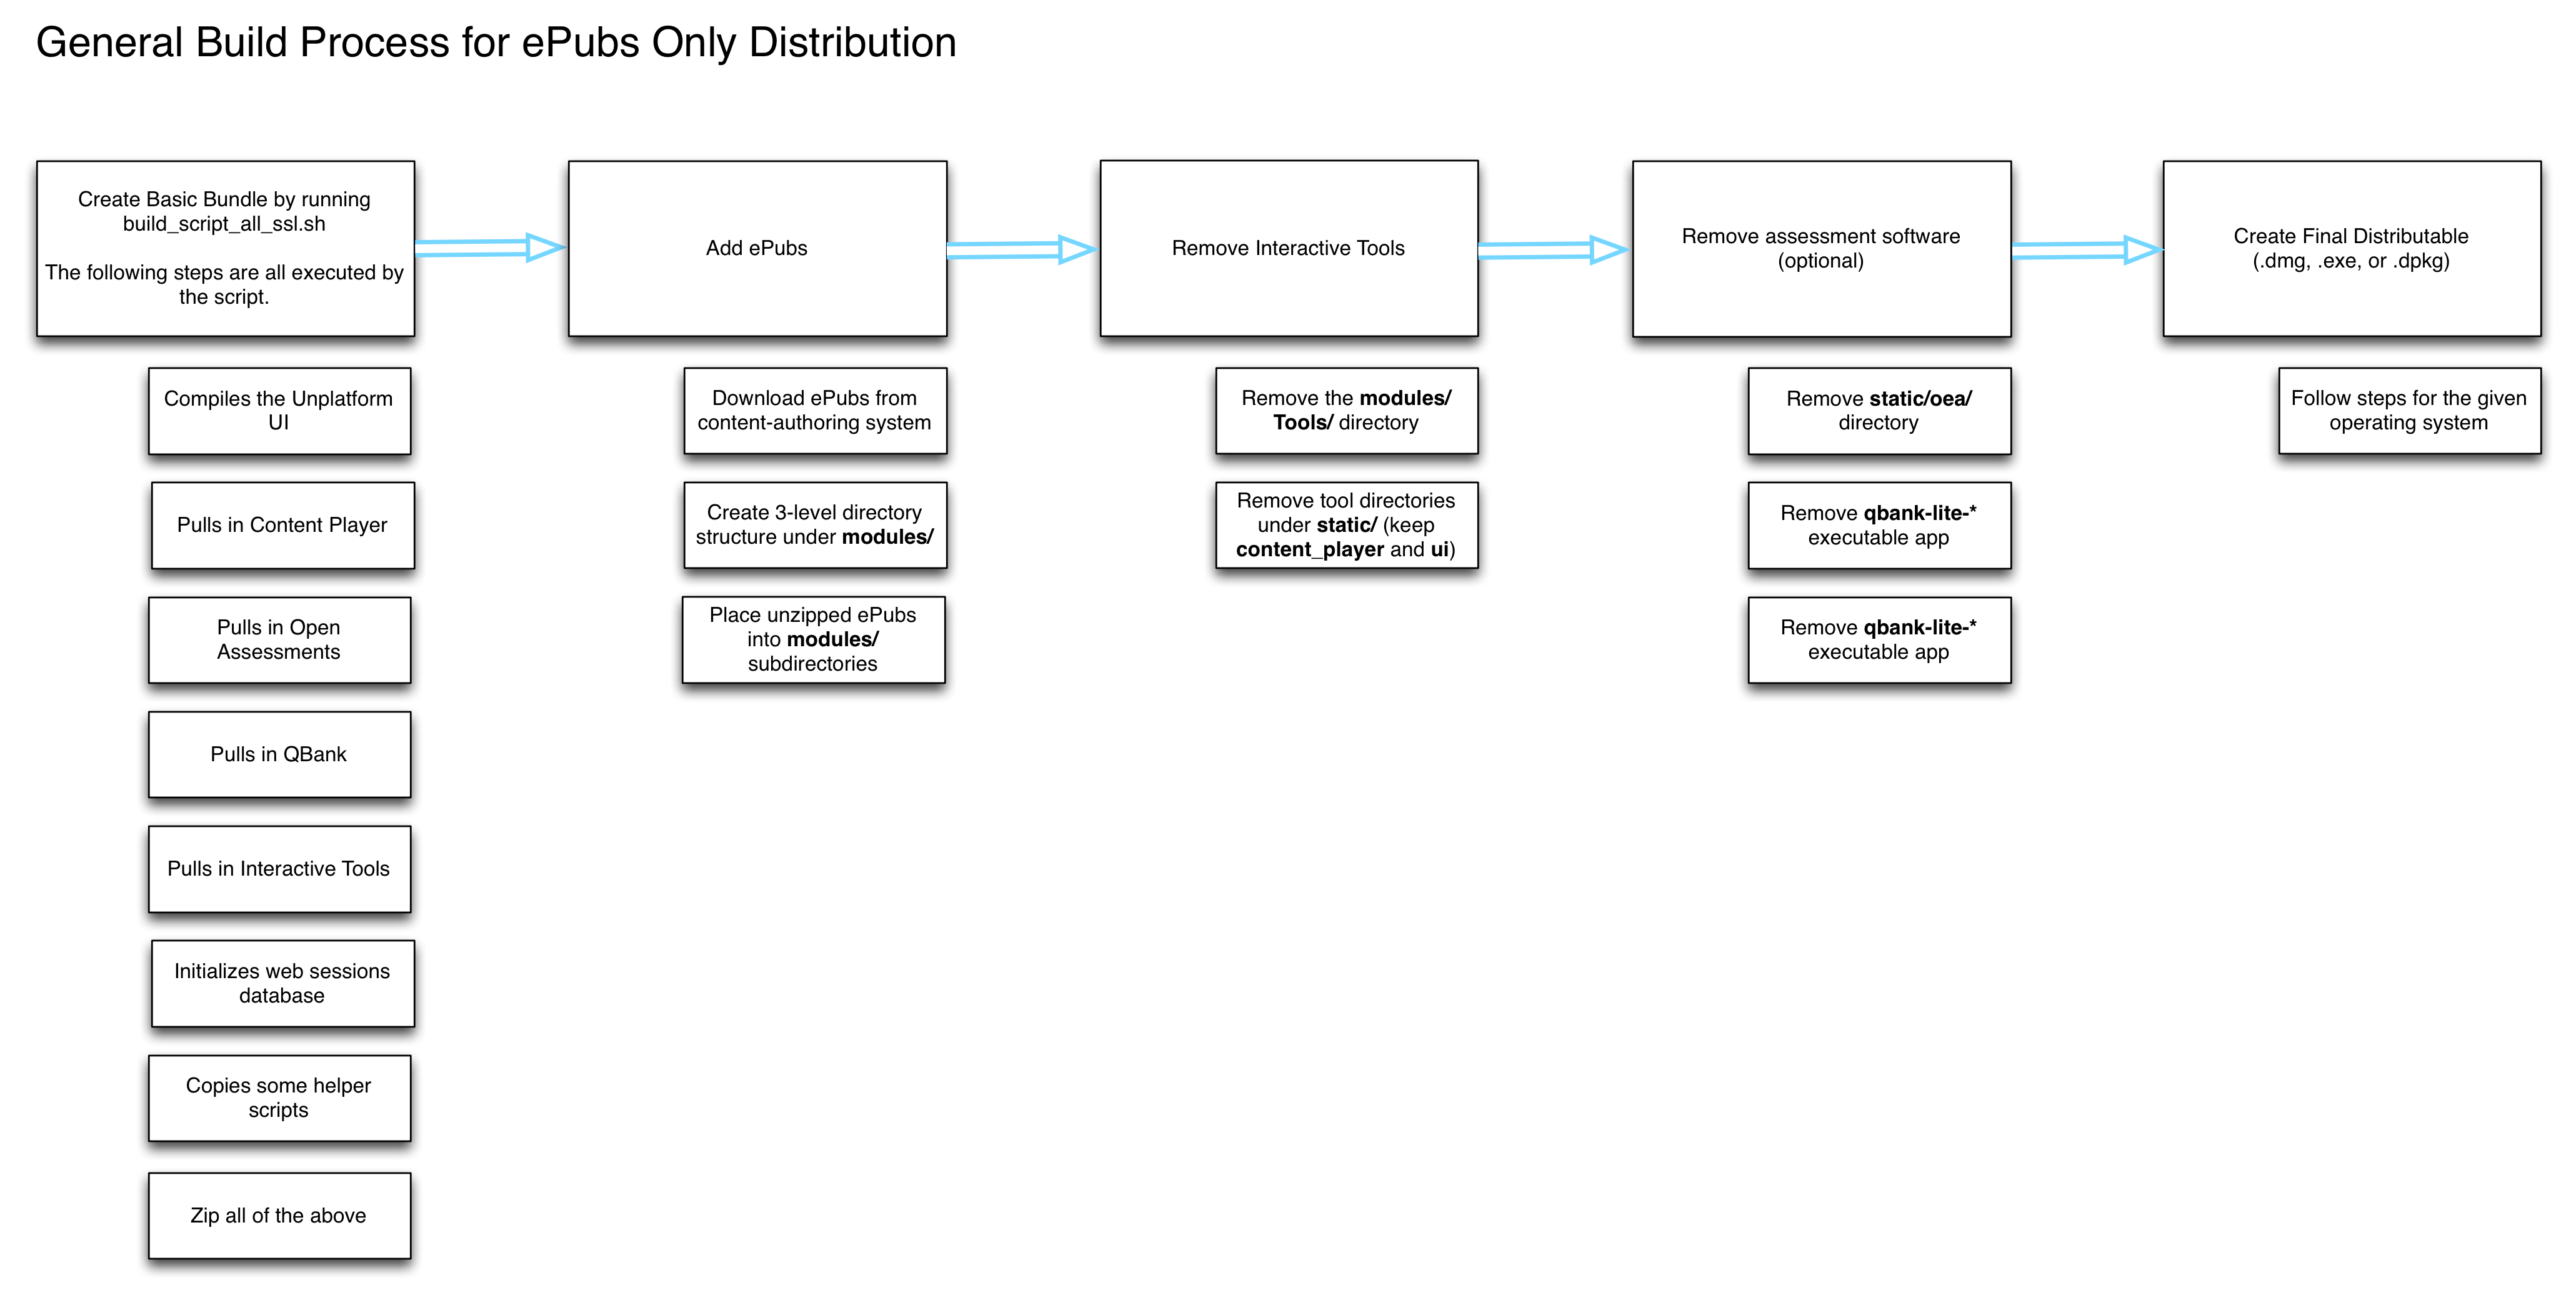 Flowchart showing the steps to use unplatform only for ePub distribution